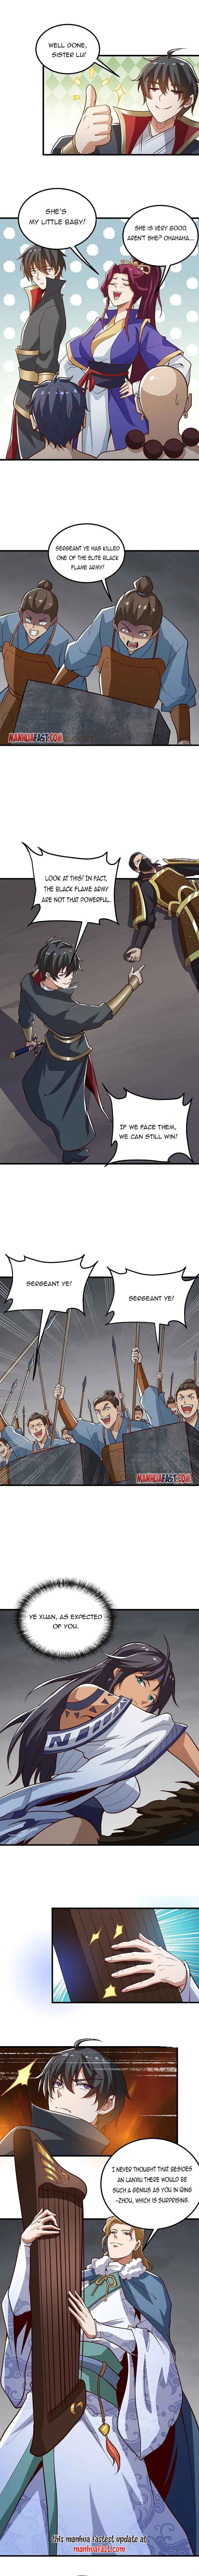 One Sword Reigns Supreme Chapter 193 page 4